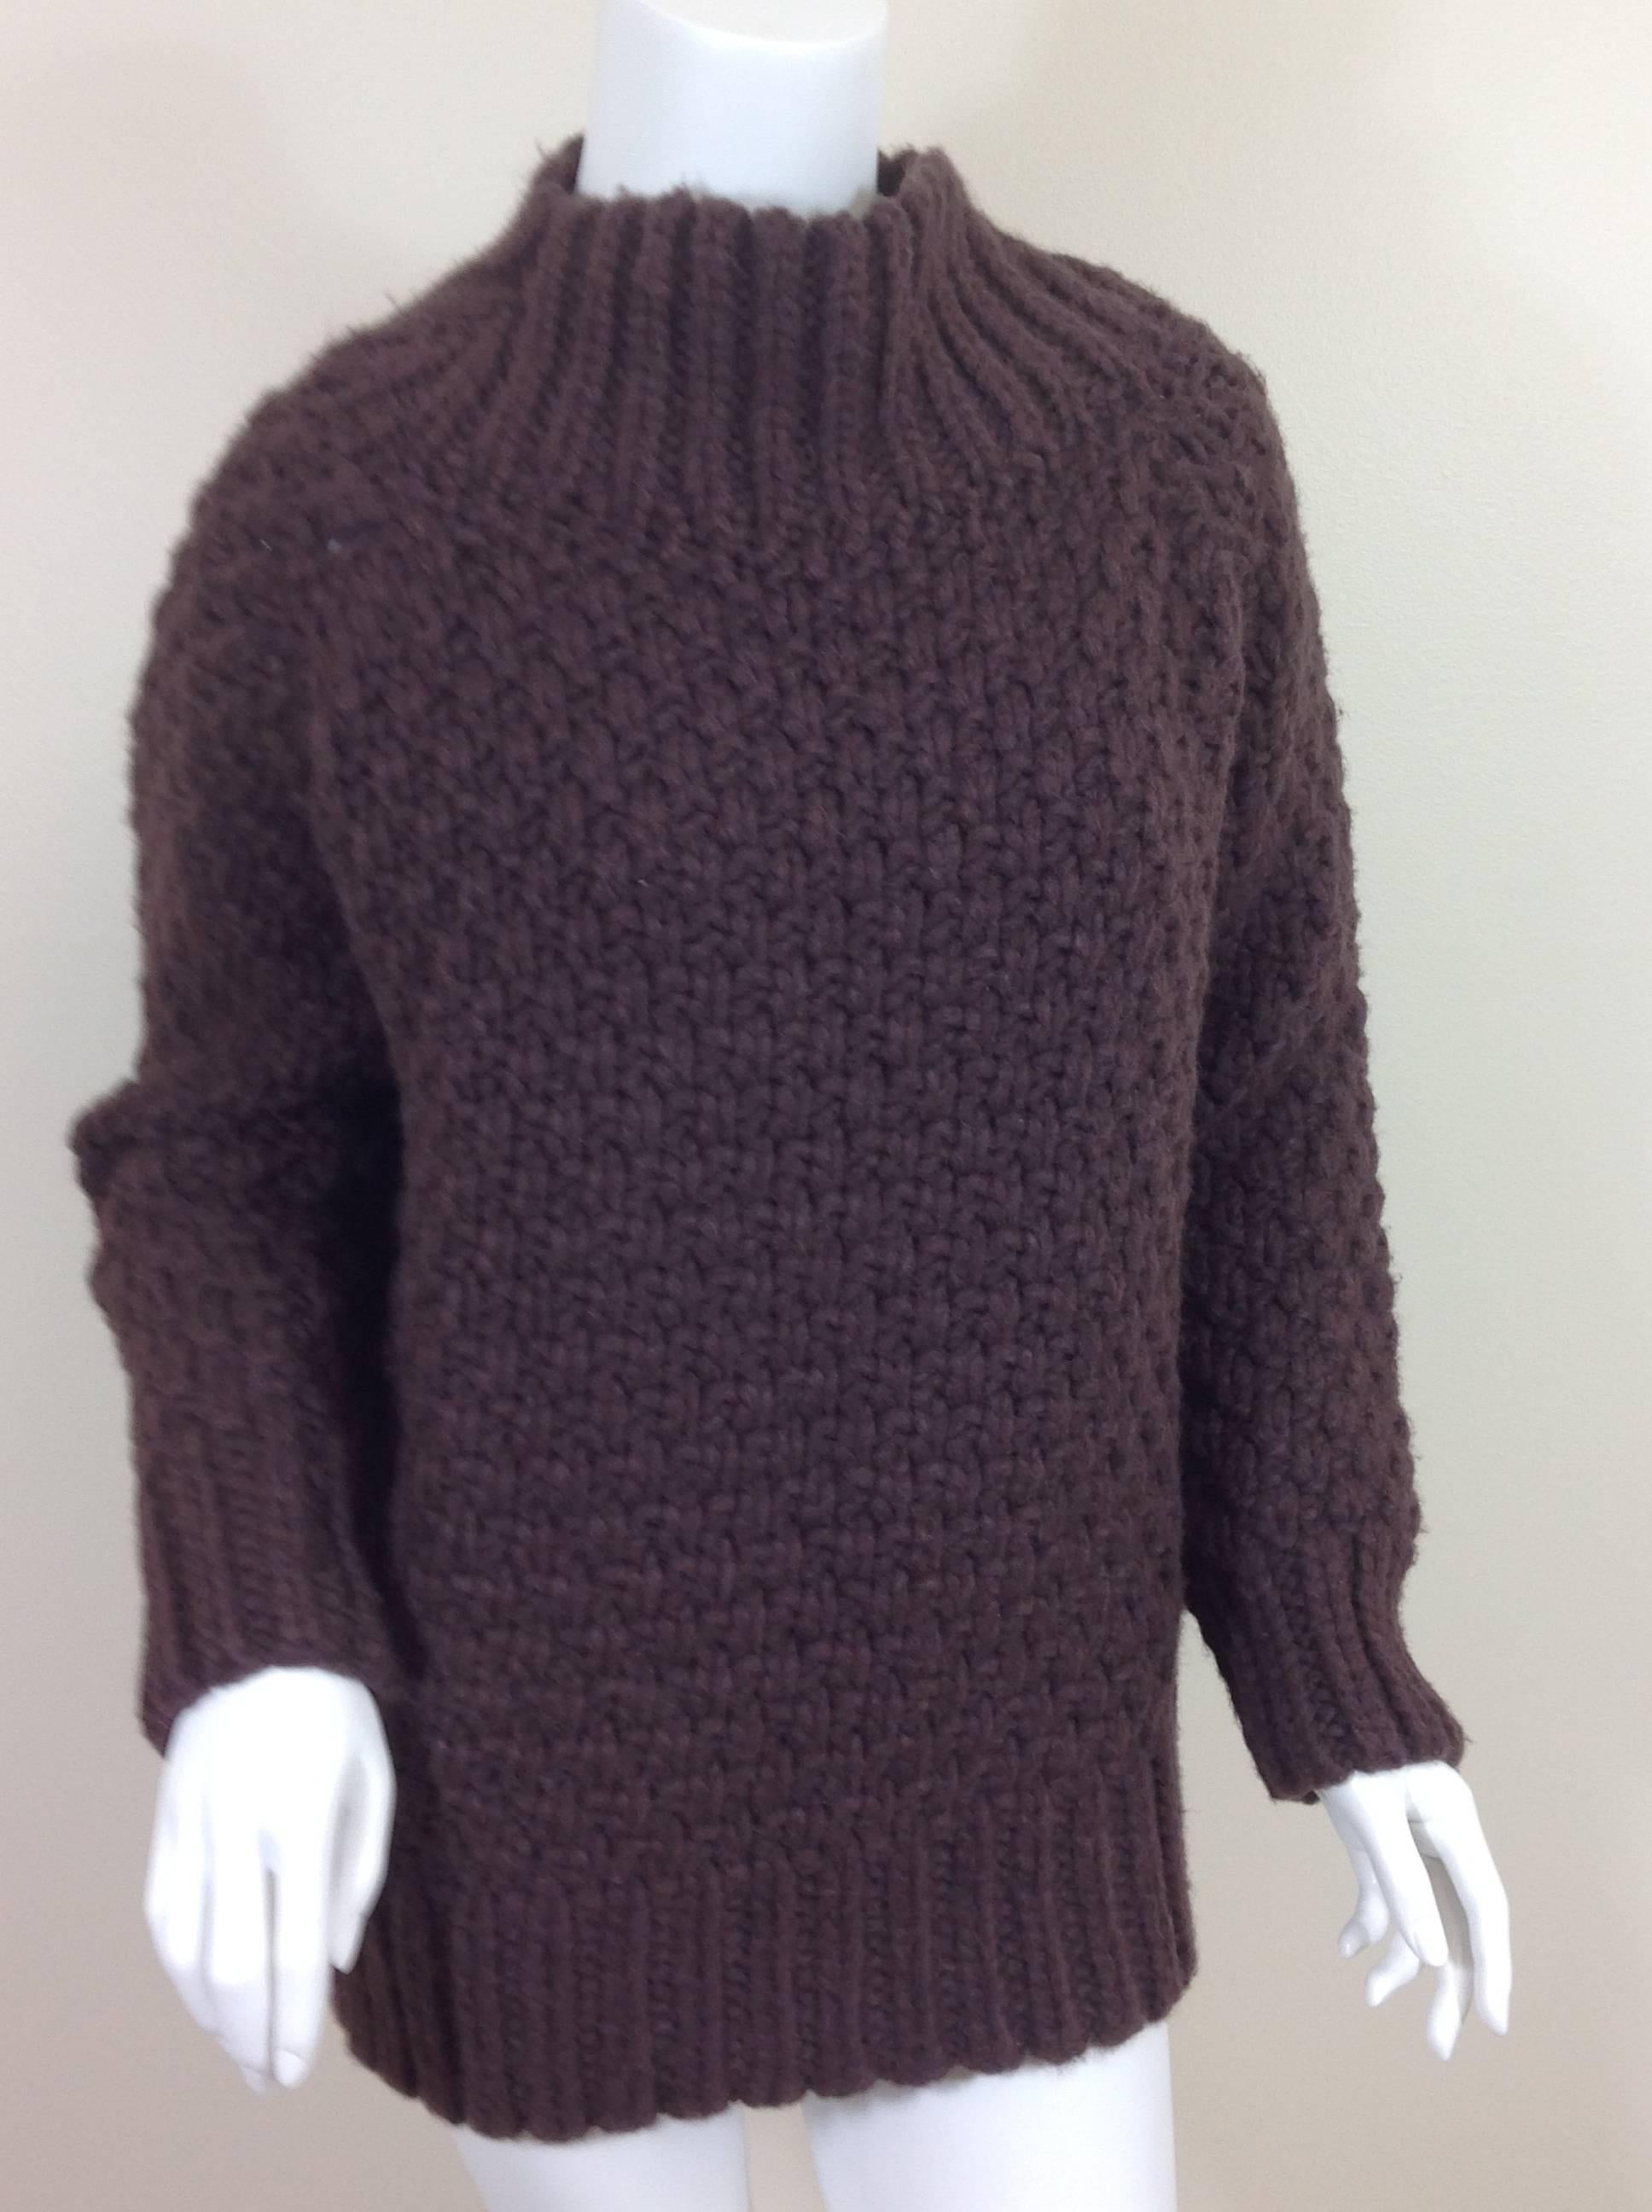 Hetty The Row funnel neck sweater.  Inticate basket weave stitch with raglan sleeves knit in. Ribbed neck, cuffs and hem.
100% lofty cashmere in aubergine . 
Made in the USA of imported yarn.
Fits true to size. All measurements taken while